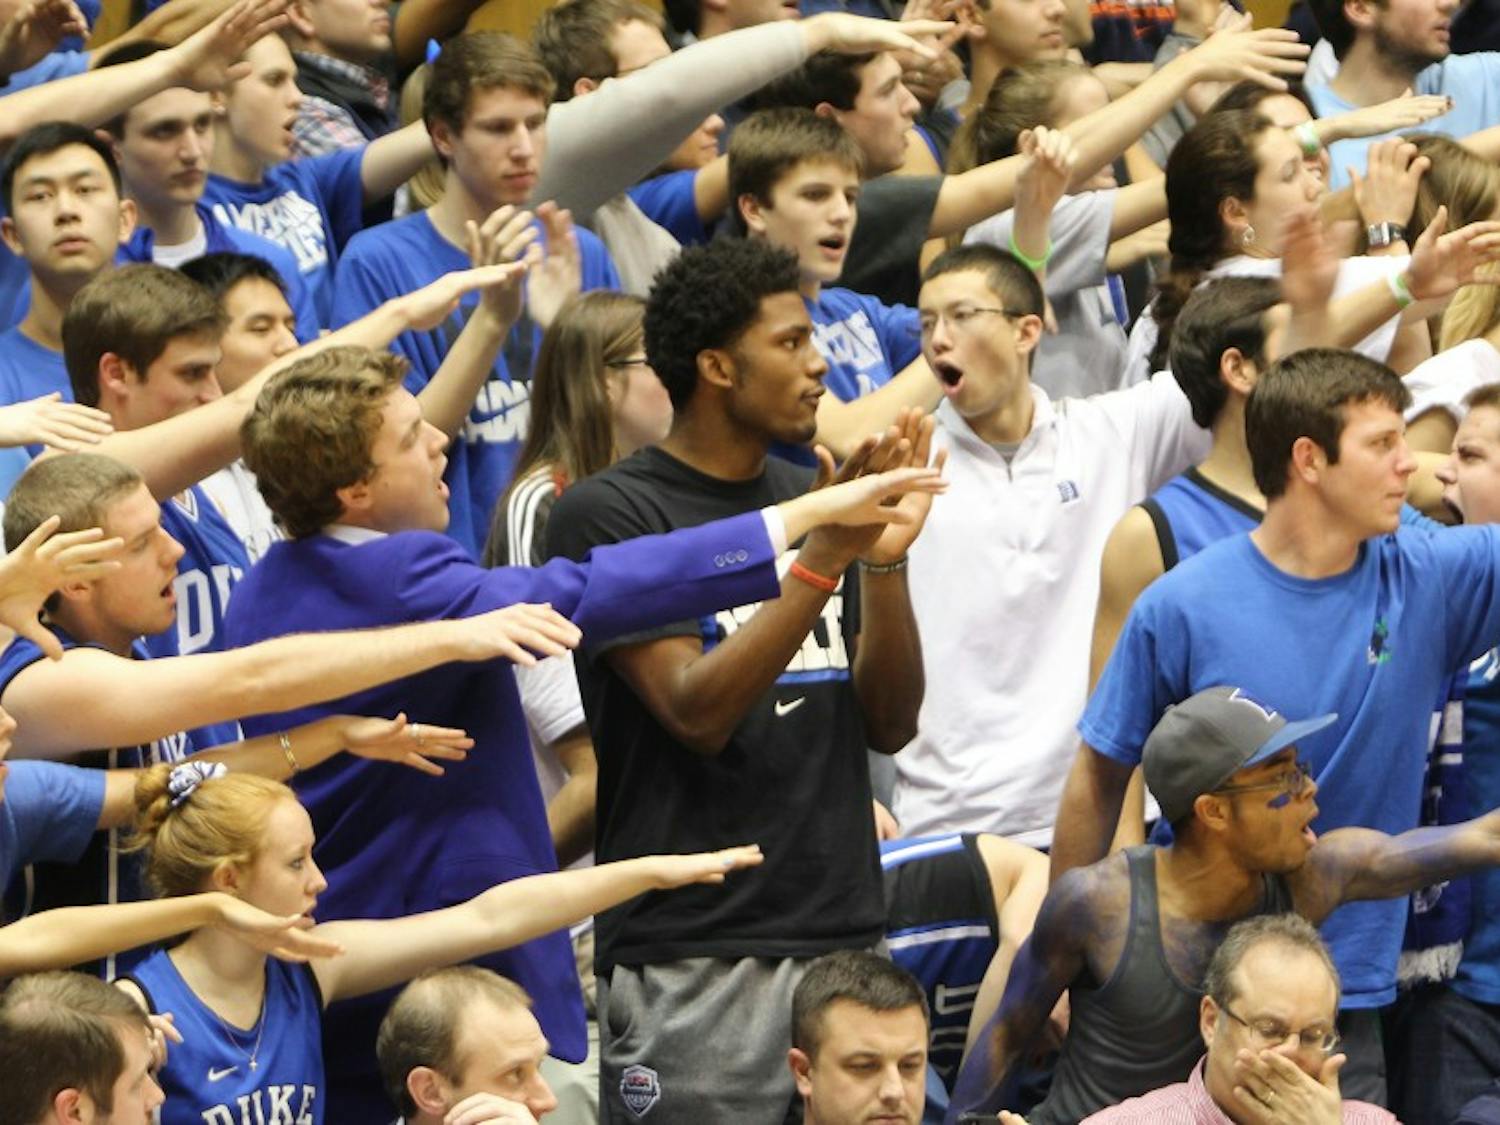 Duke signee Justise Winslow spent the second half of Monday's win against Virginia watching the game with the Cameron Crazies.